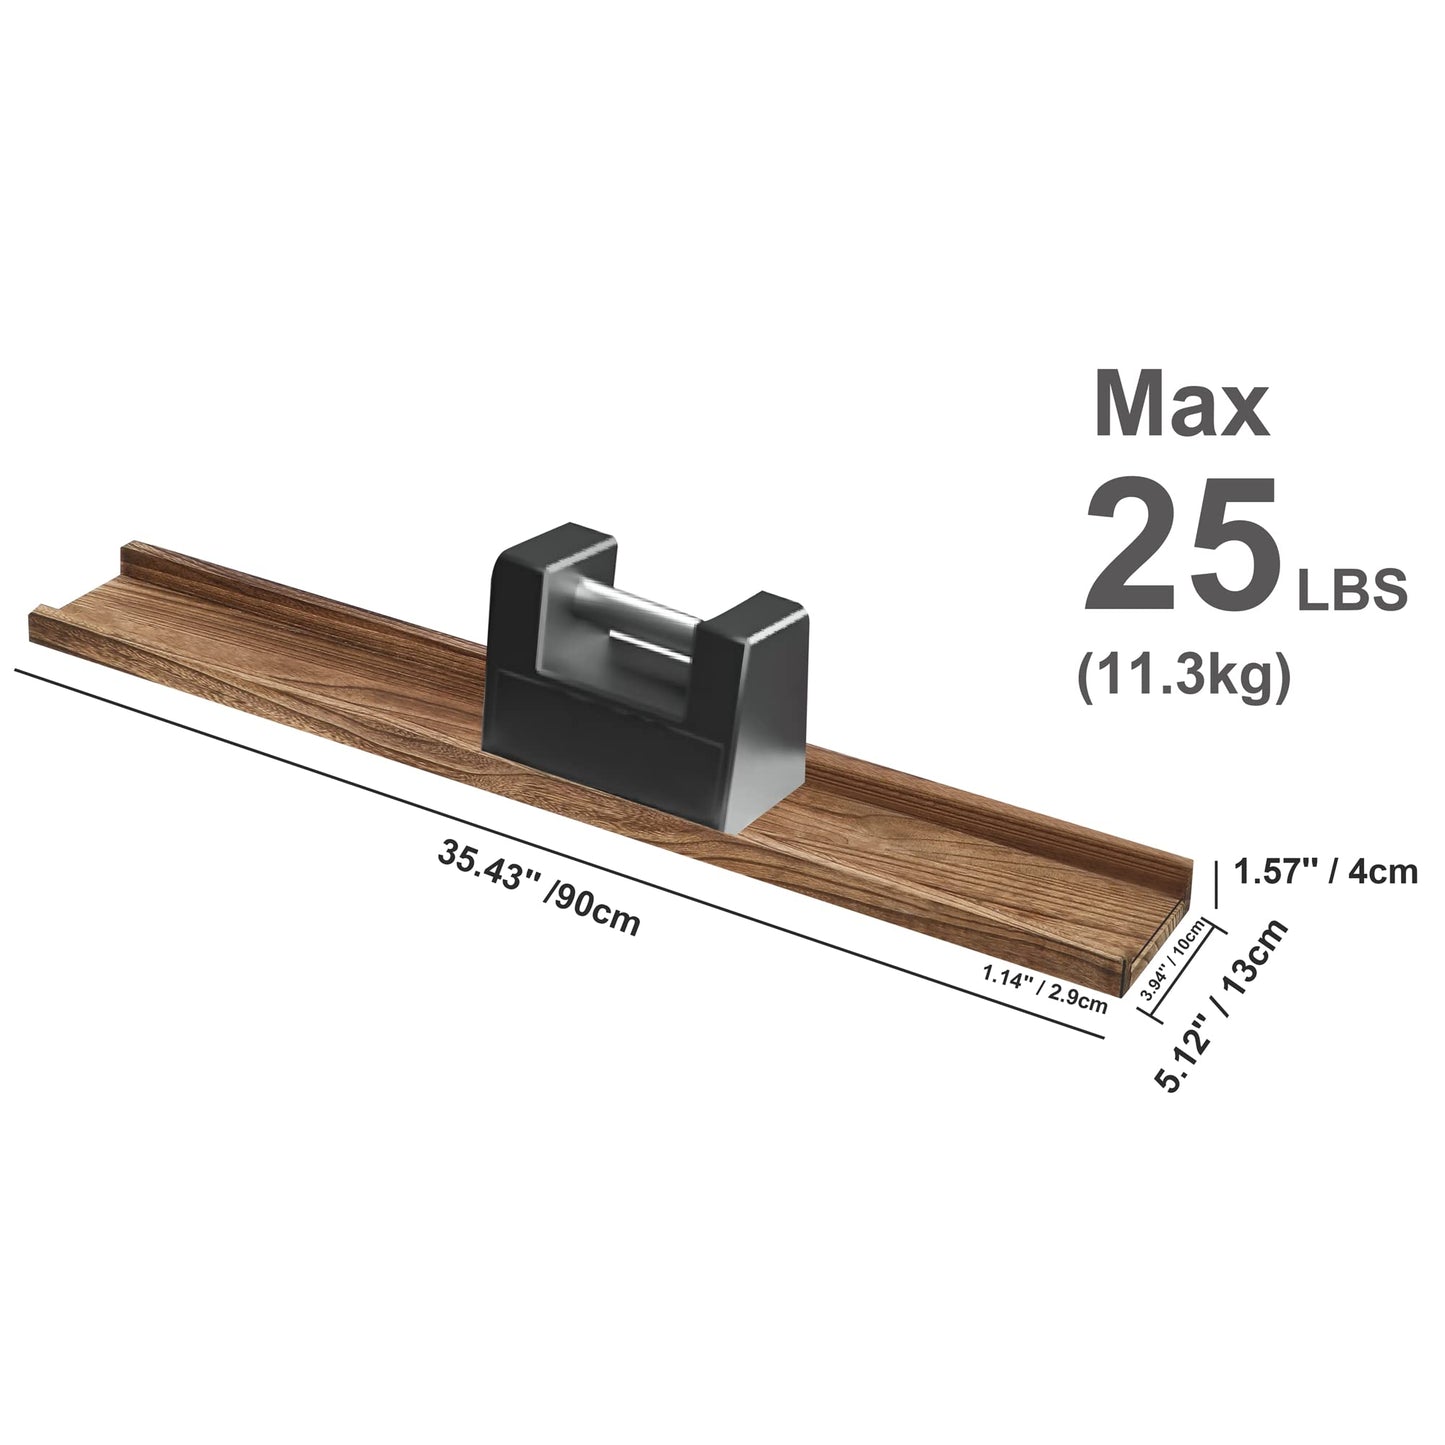 Floating Shelves with Lip 36 Inches Set of 2 | Sustainable Home Decor